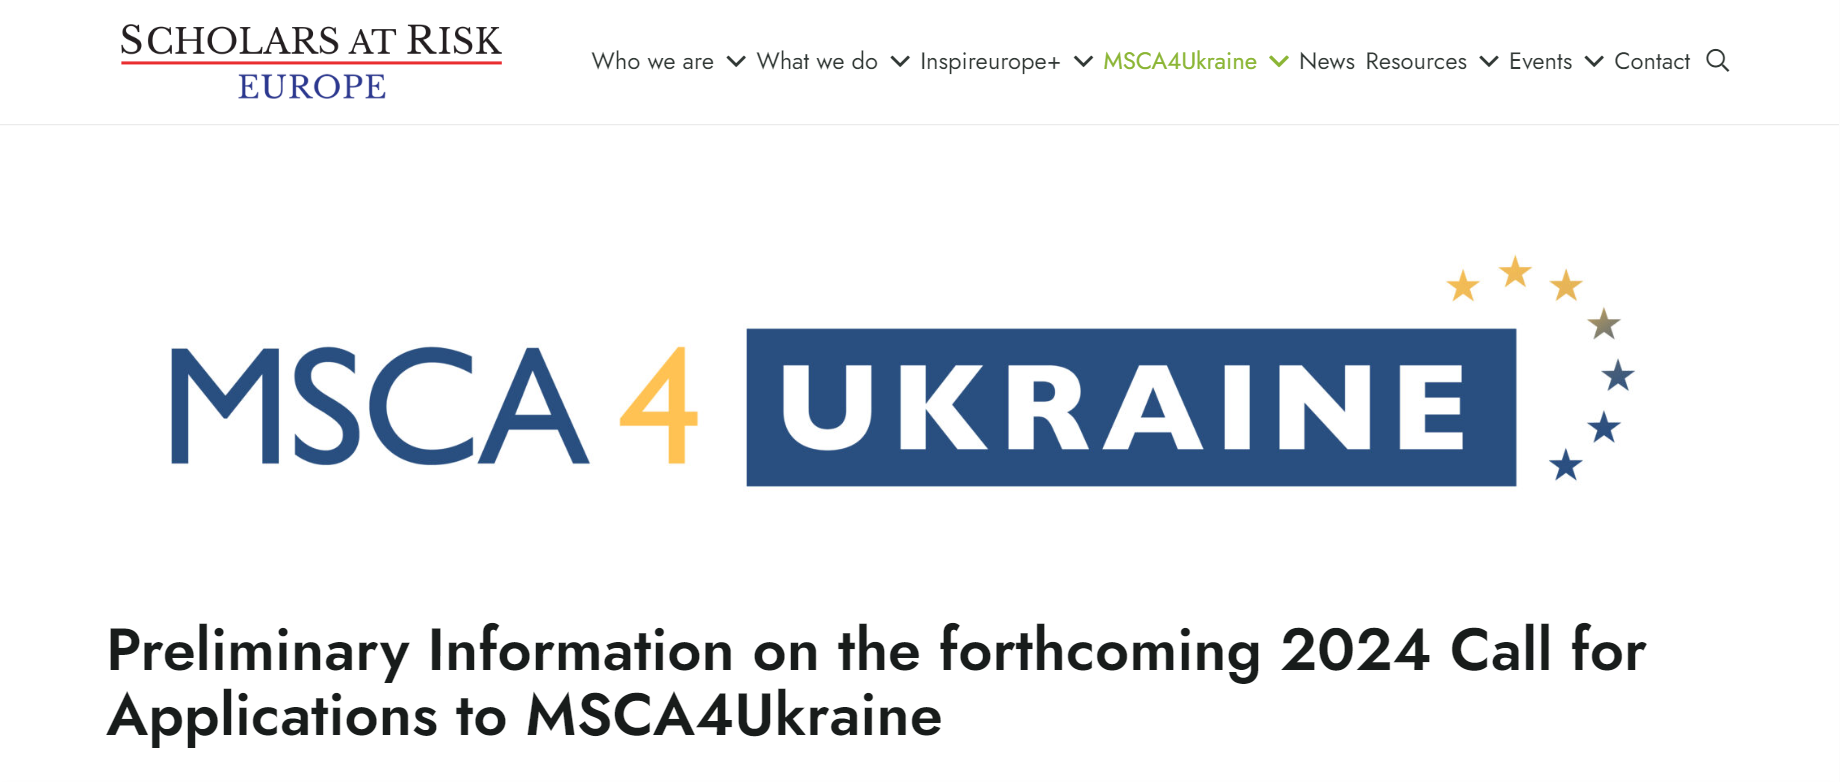 Preliminary Information on the forthcoming 2024 Call for Applications to MSCA4Ukraine